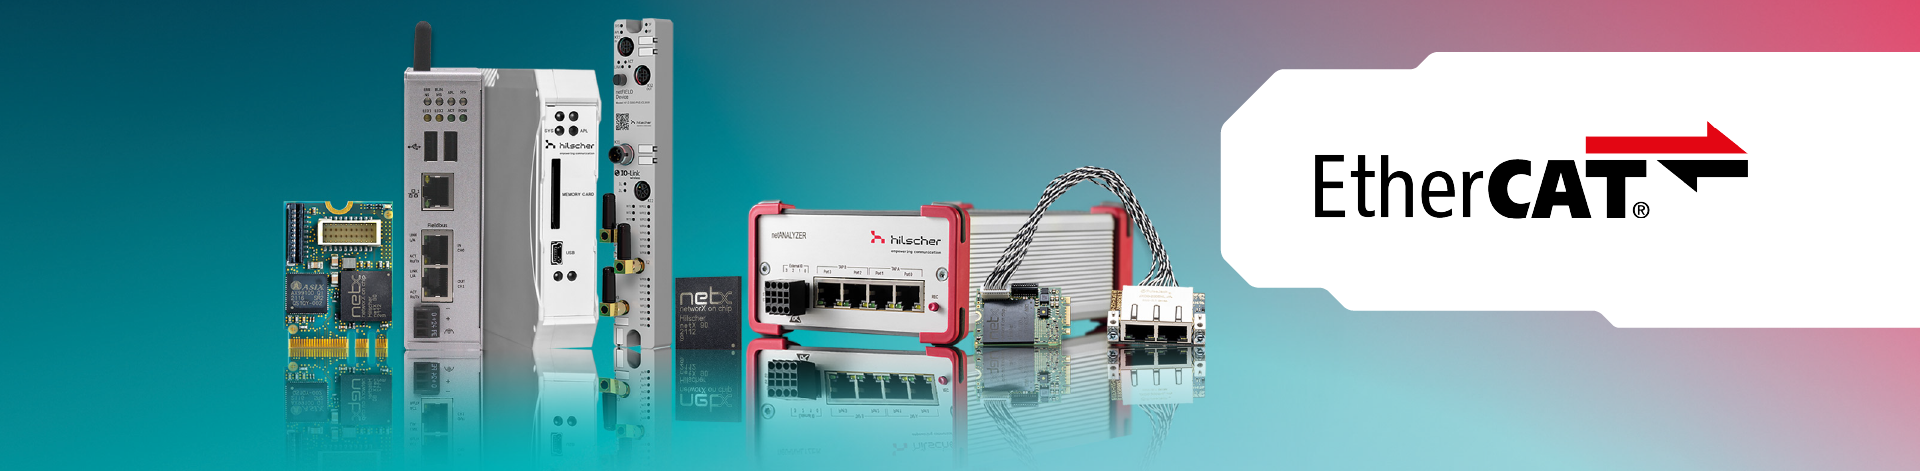 A line of 8 industrial communication products by Hilscher on a blue and red background. On a white area on the right side, there is a EtherCAT logo in black and red.